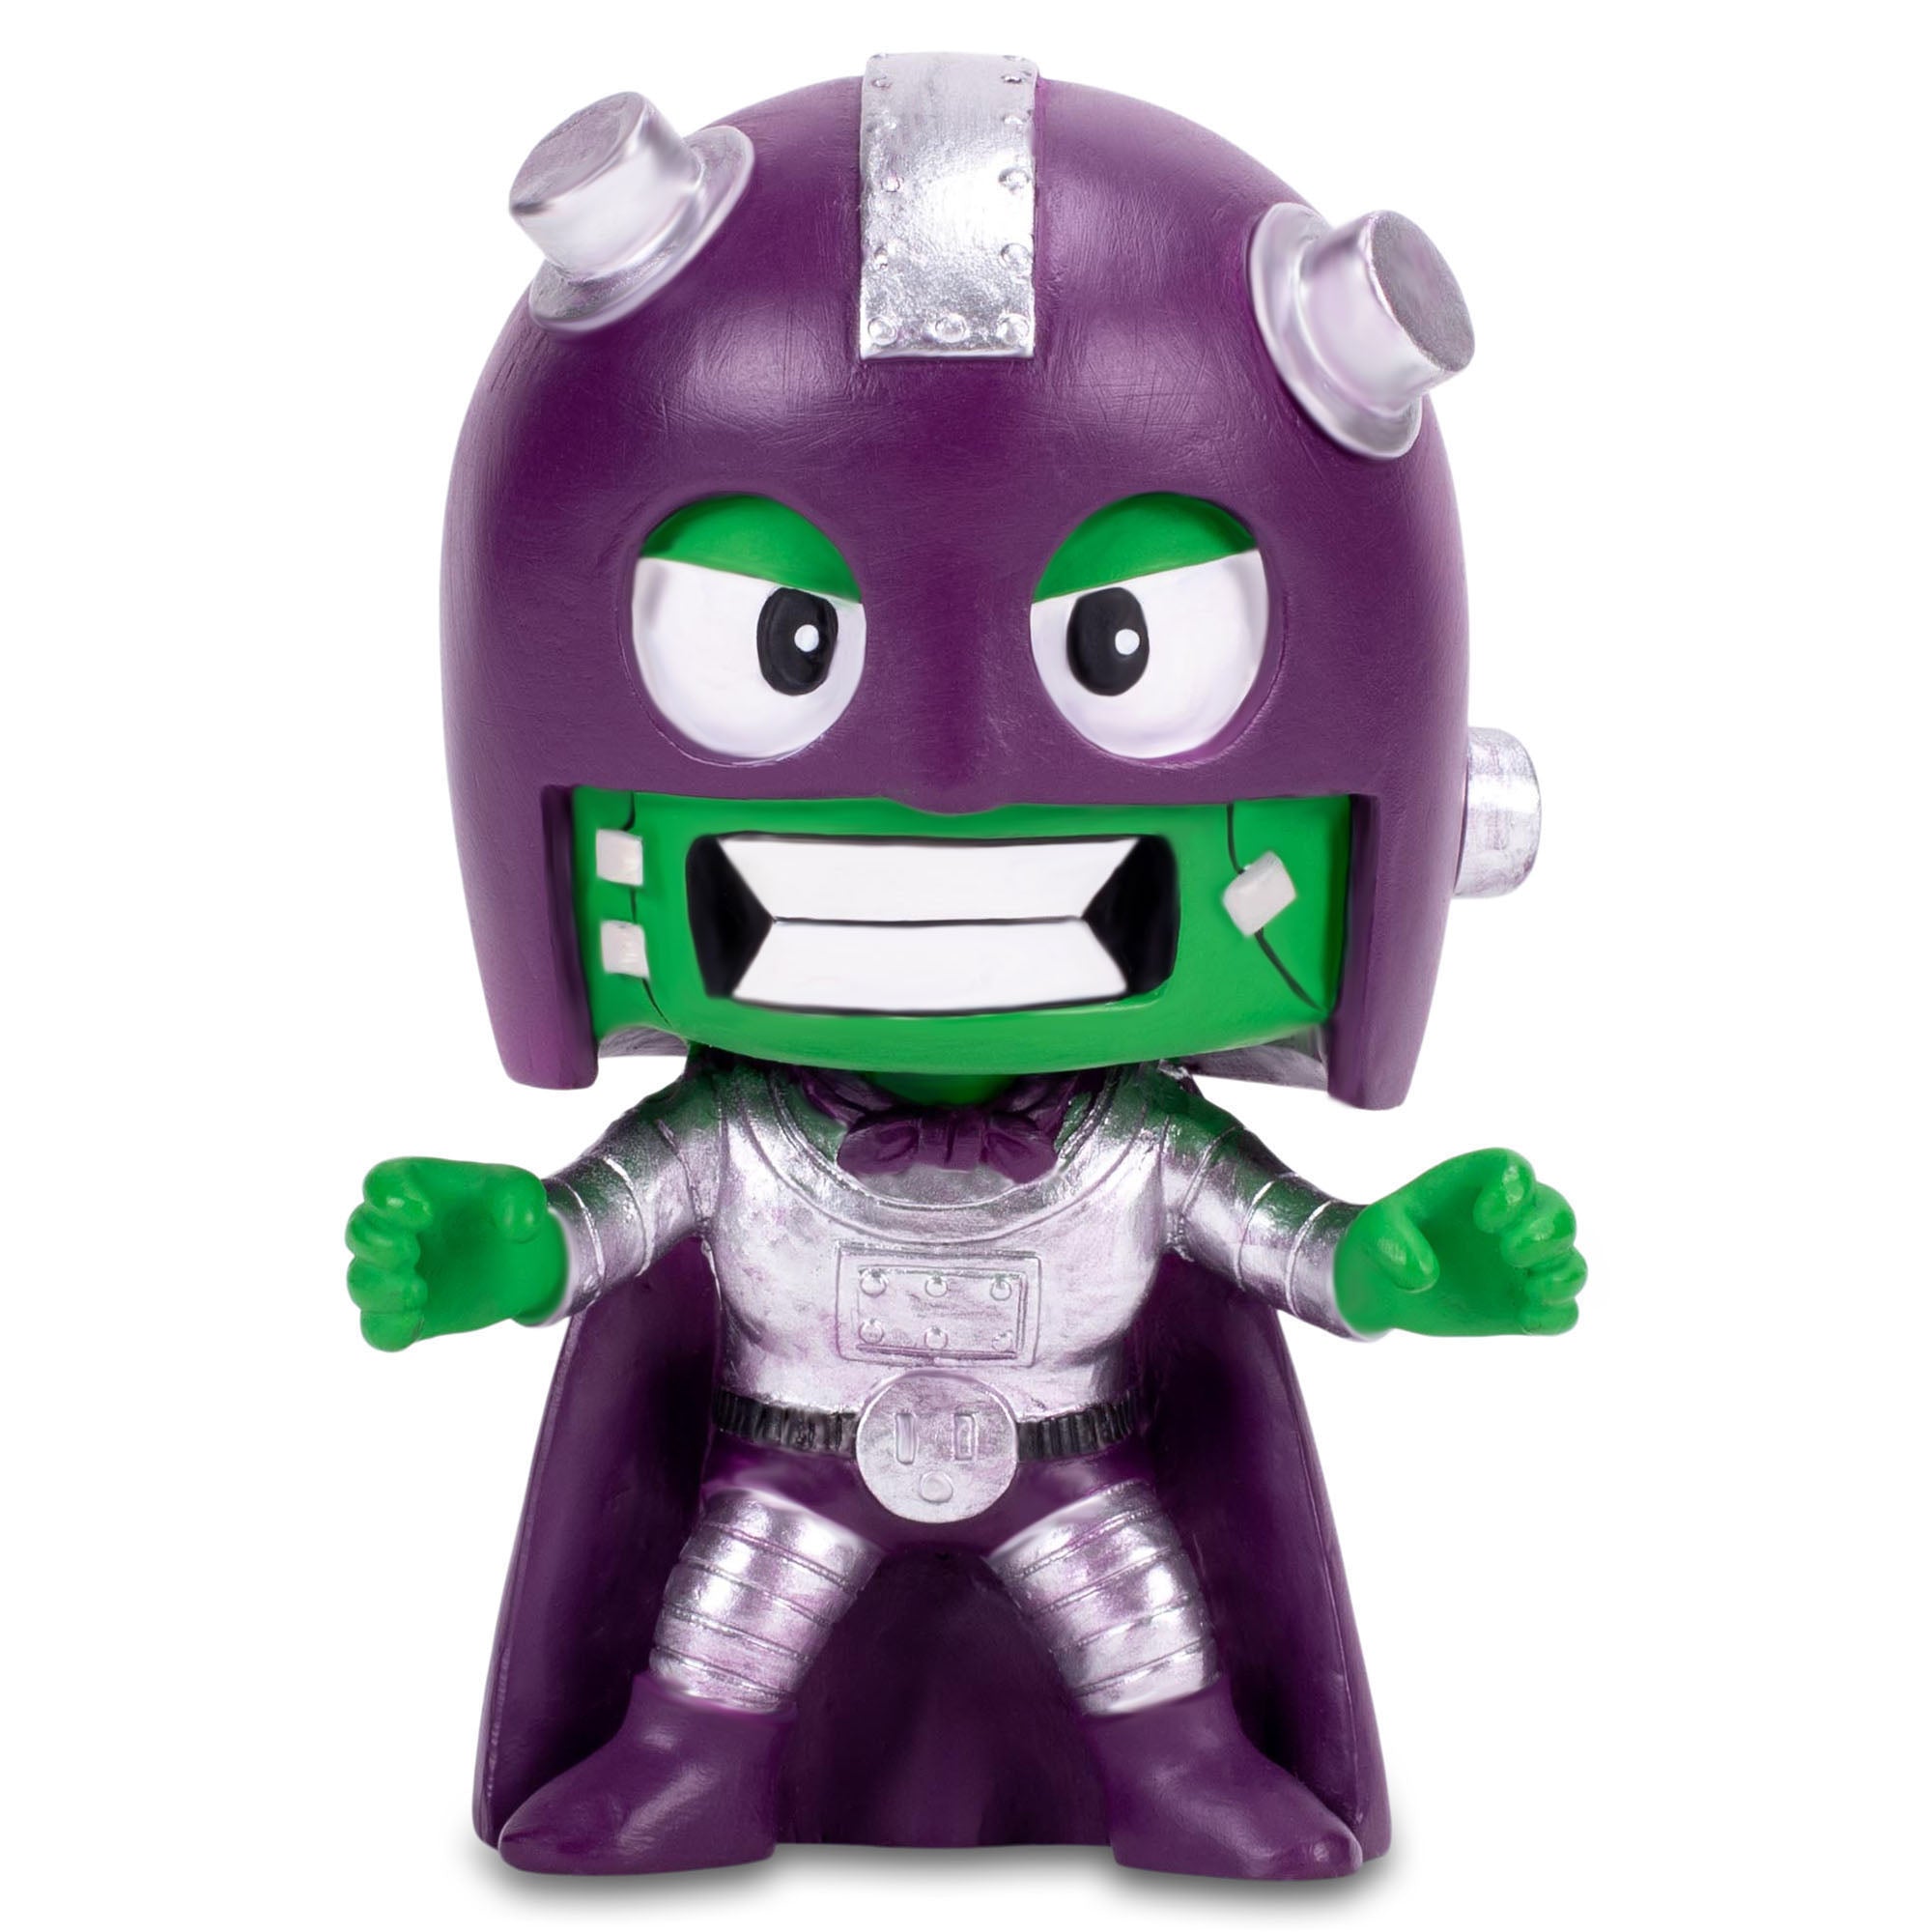 "Front angle of monster character, Frankenstein, action figure with studded hot purple helmet and metallic silver tone accents "